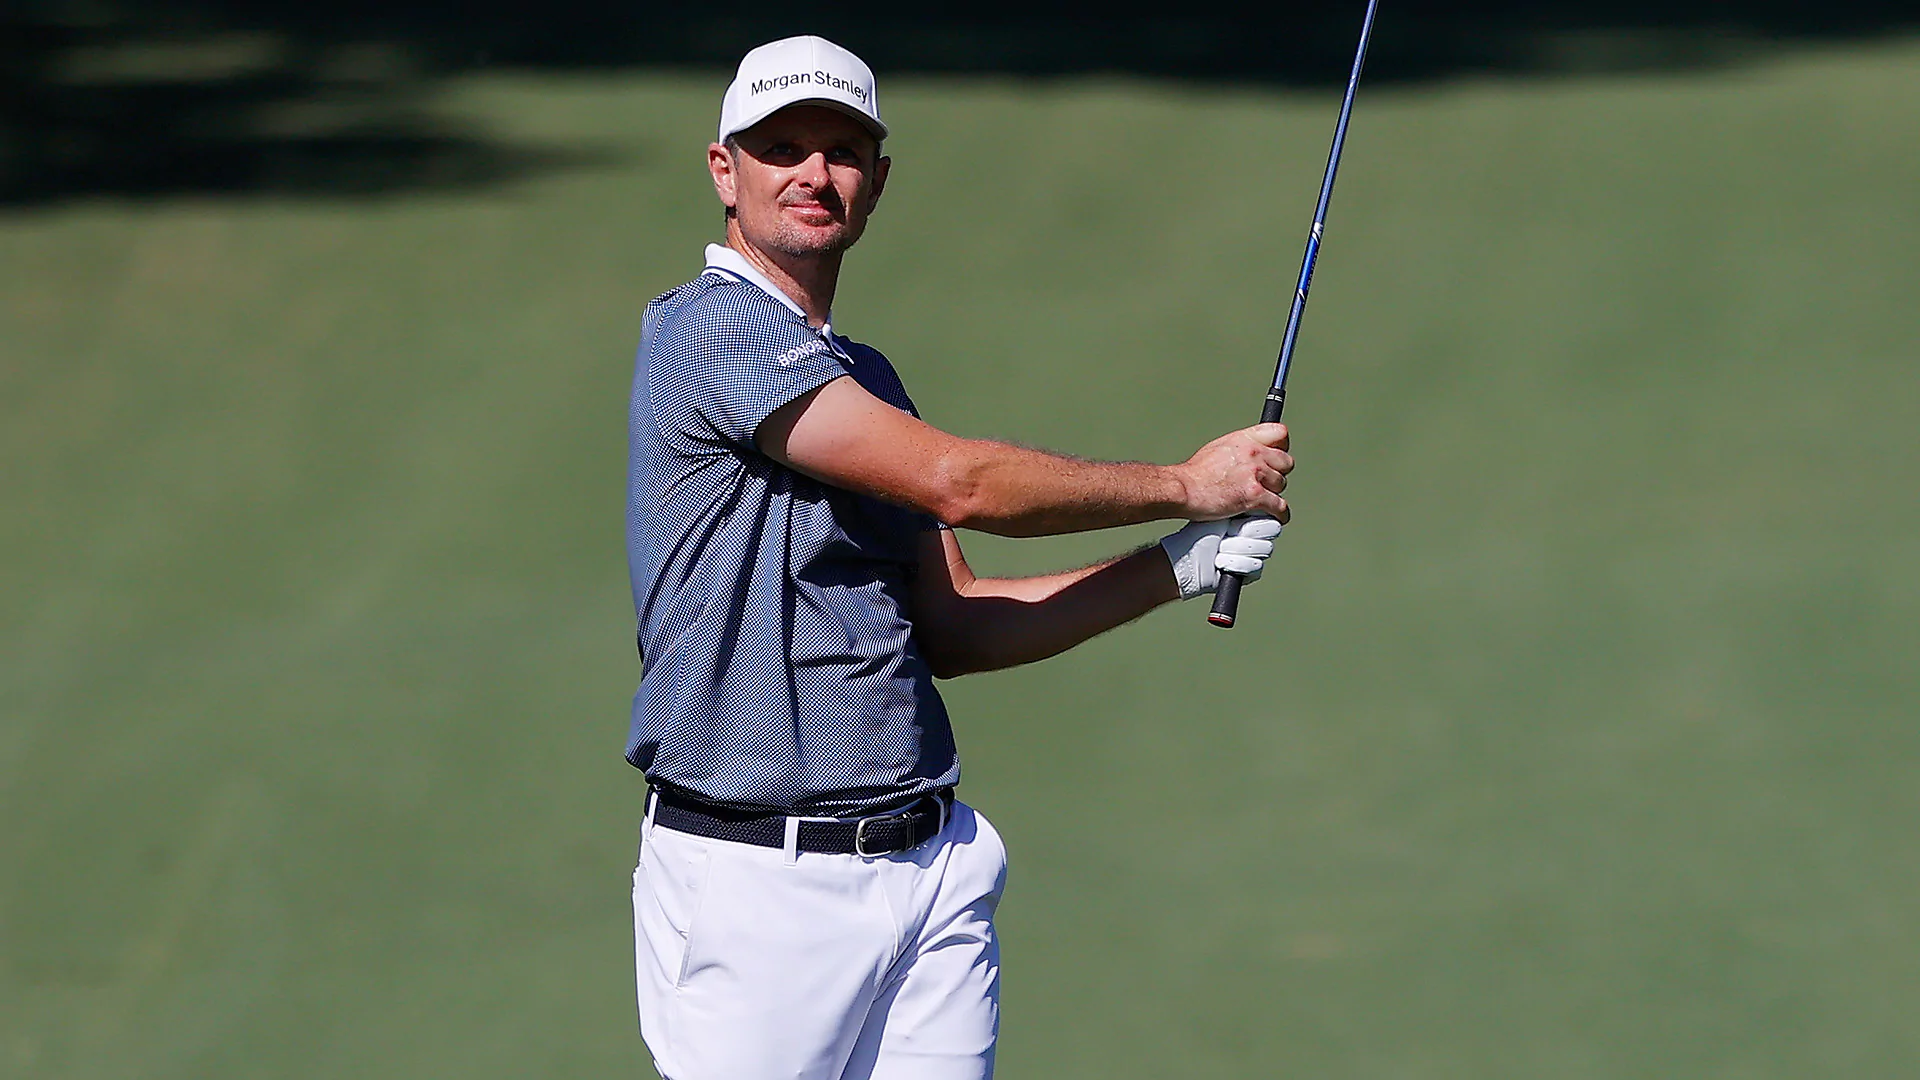 Justin Rose (63) shines with mixed bag in first round since split from Honma